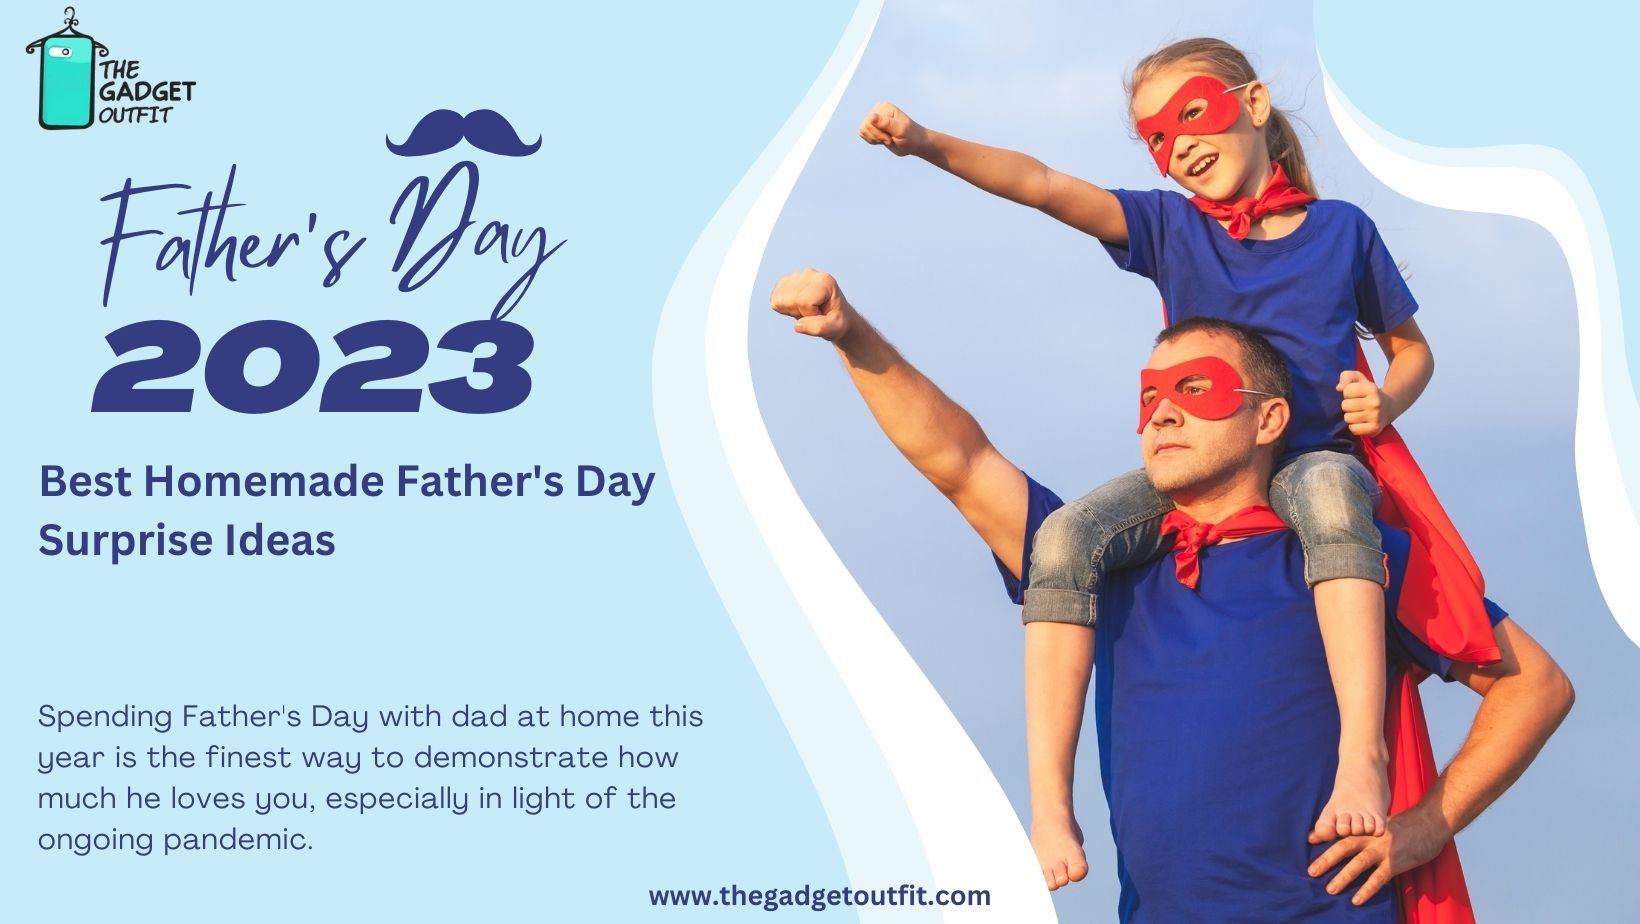 Best Homemade Father's Day Surprise Ideas